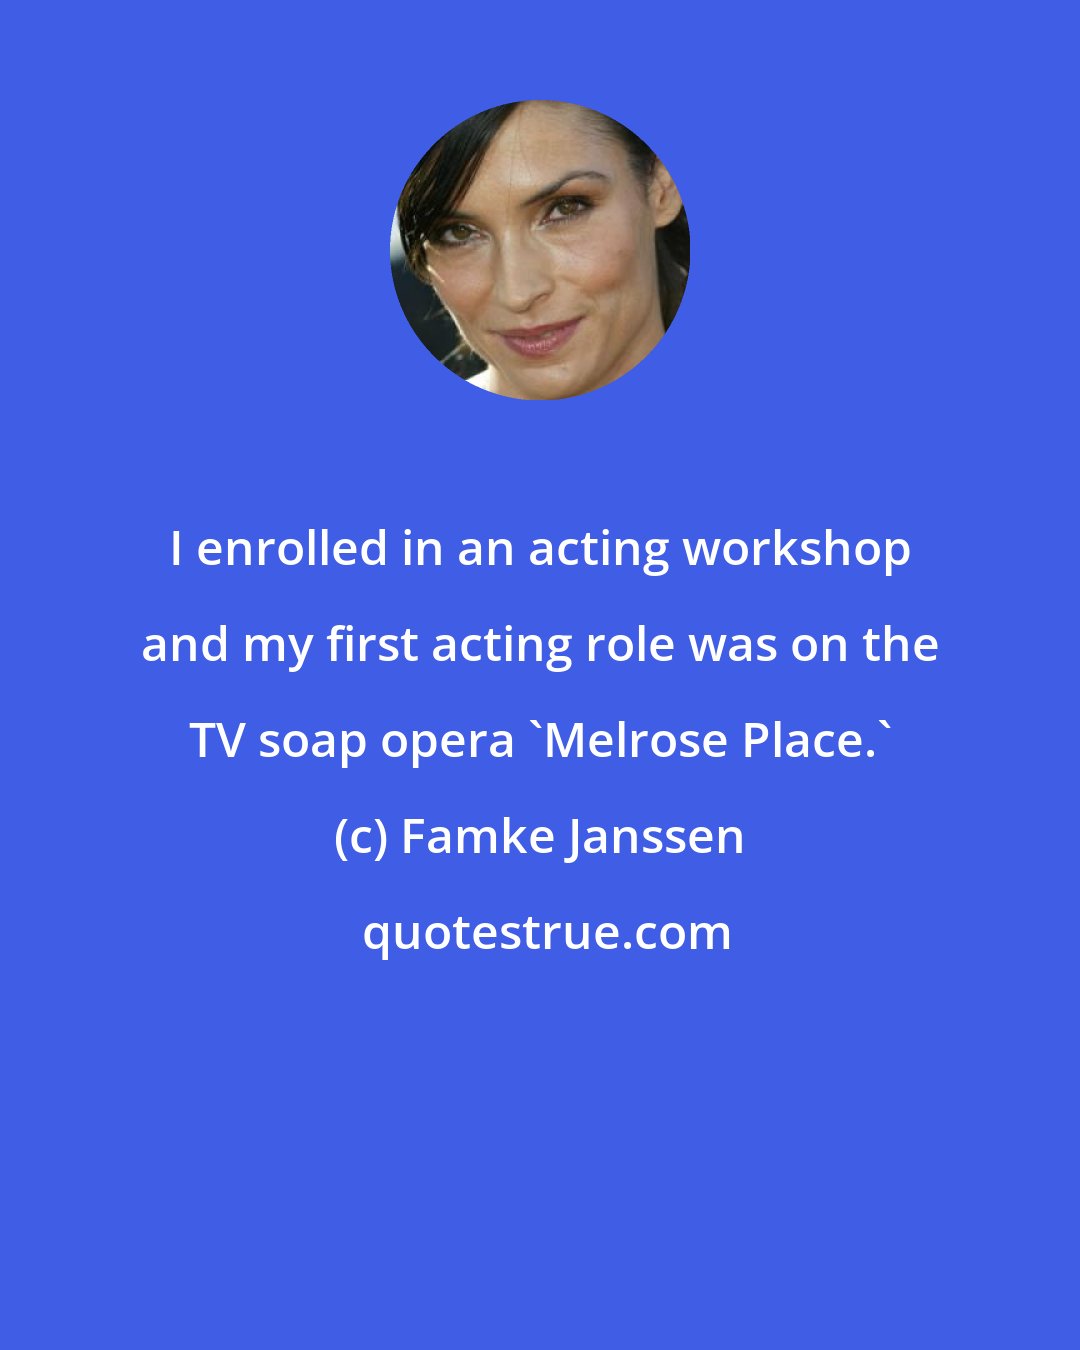 Famke Janssen: I enrolled in an acting workshop and my first acting role was on the TV soap opera 'Melrose Place.'